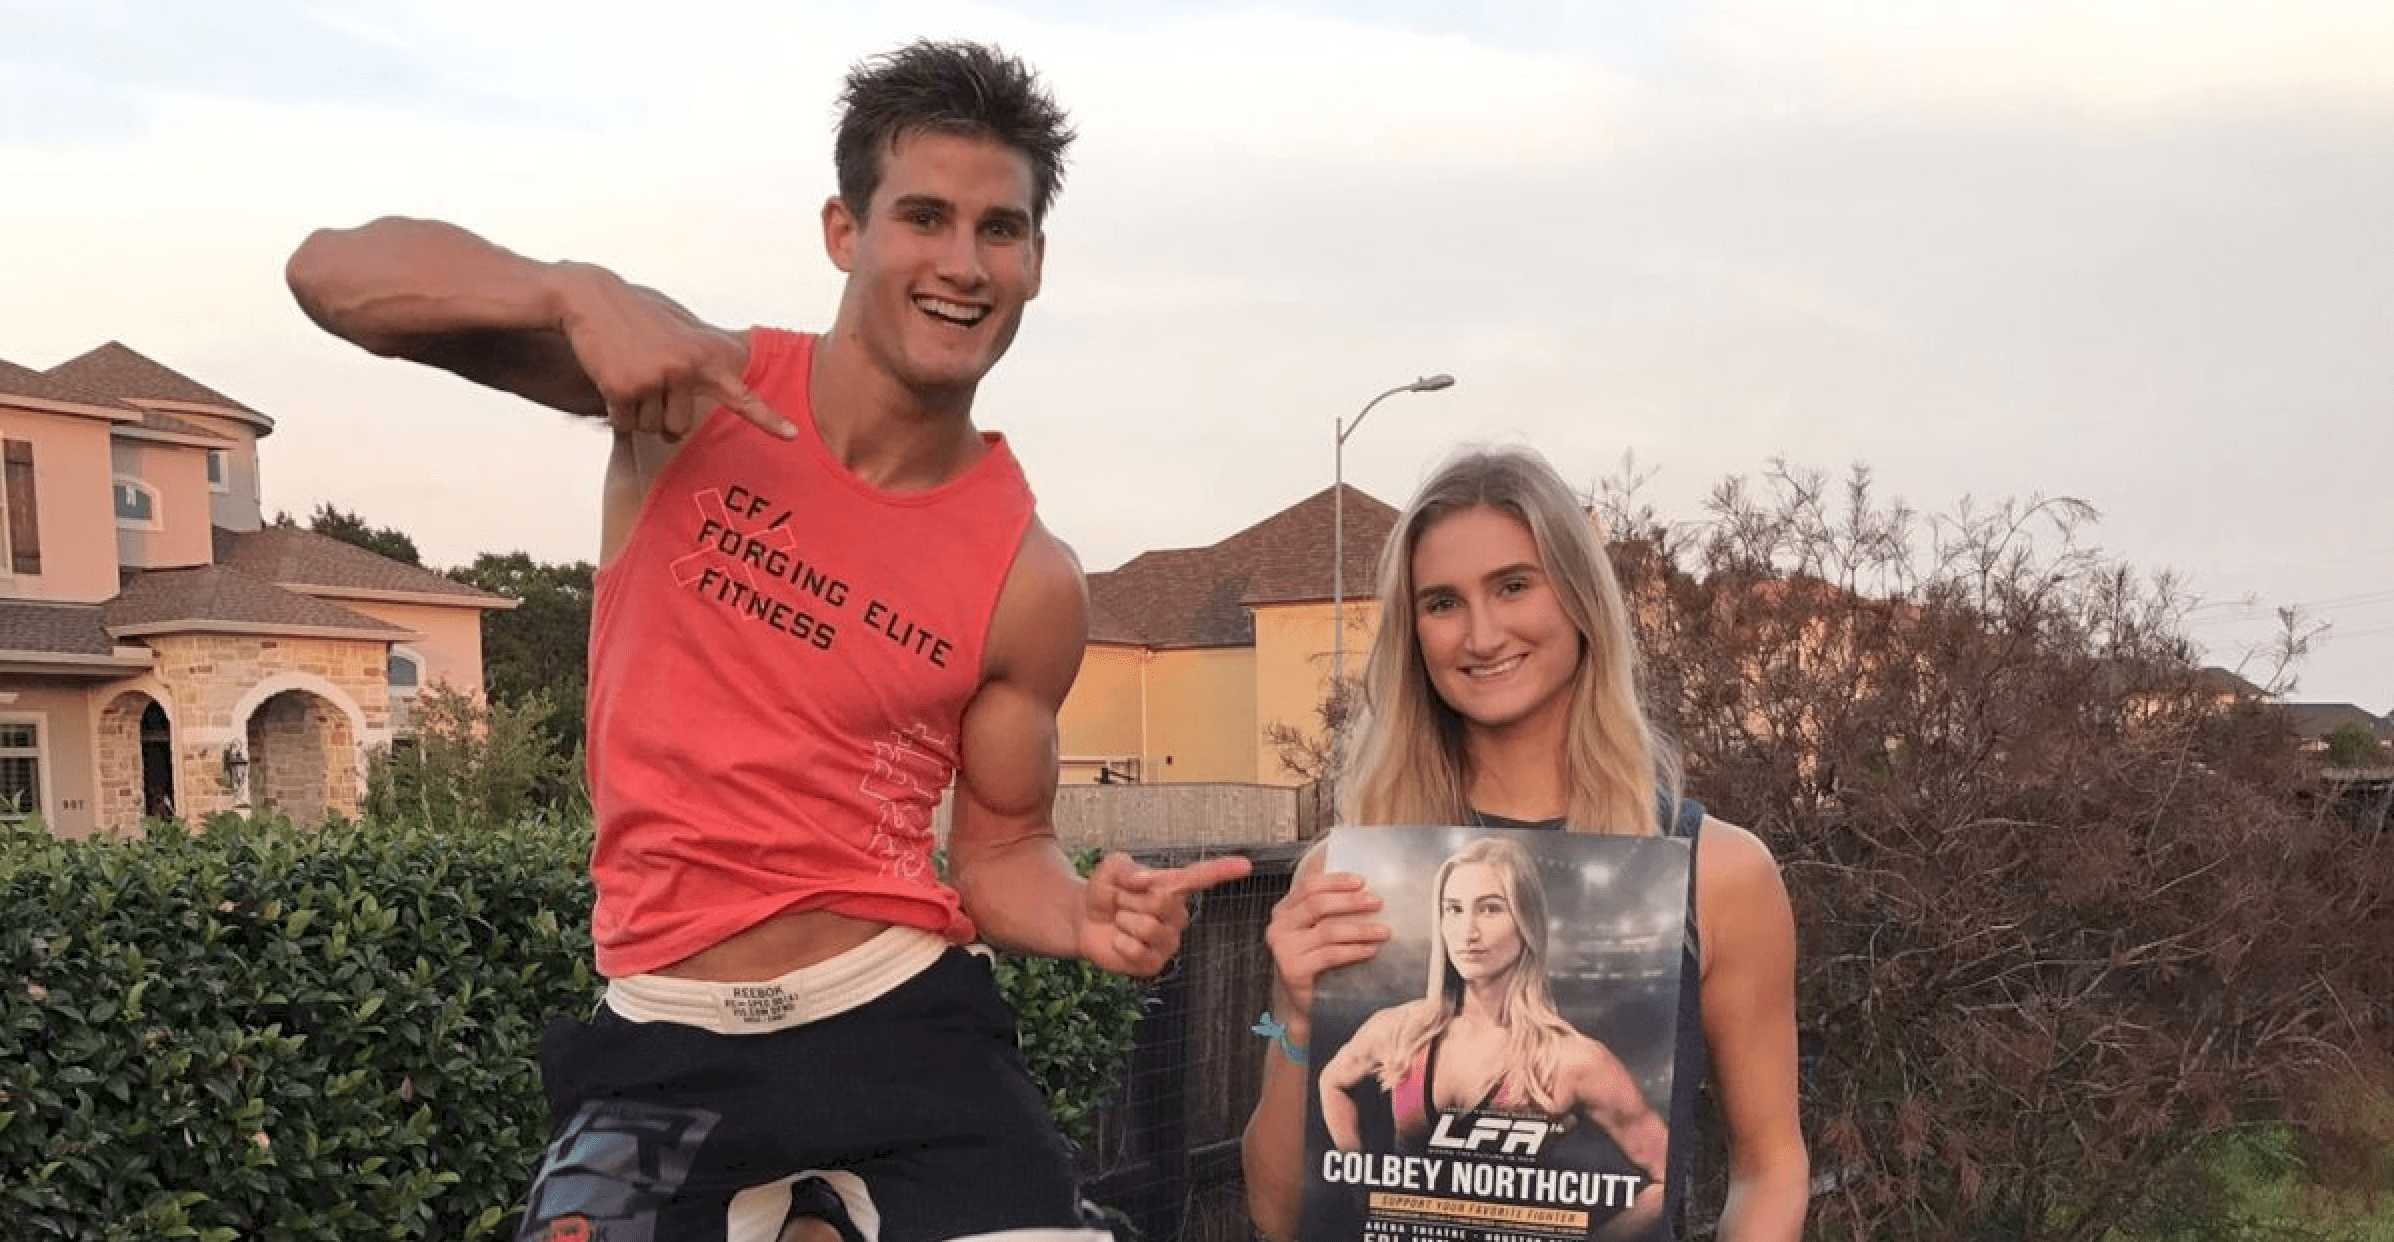 Sage Northcutt: It’d Be Cool To Fight On Same Card As My Sister Colbey